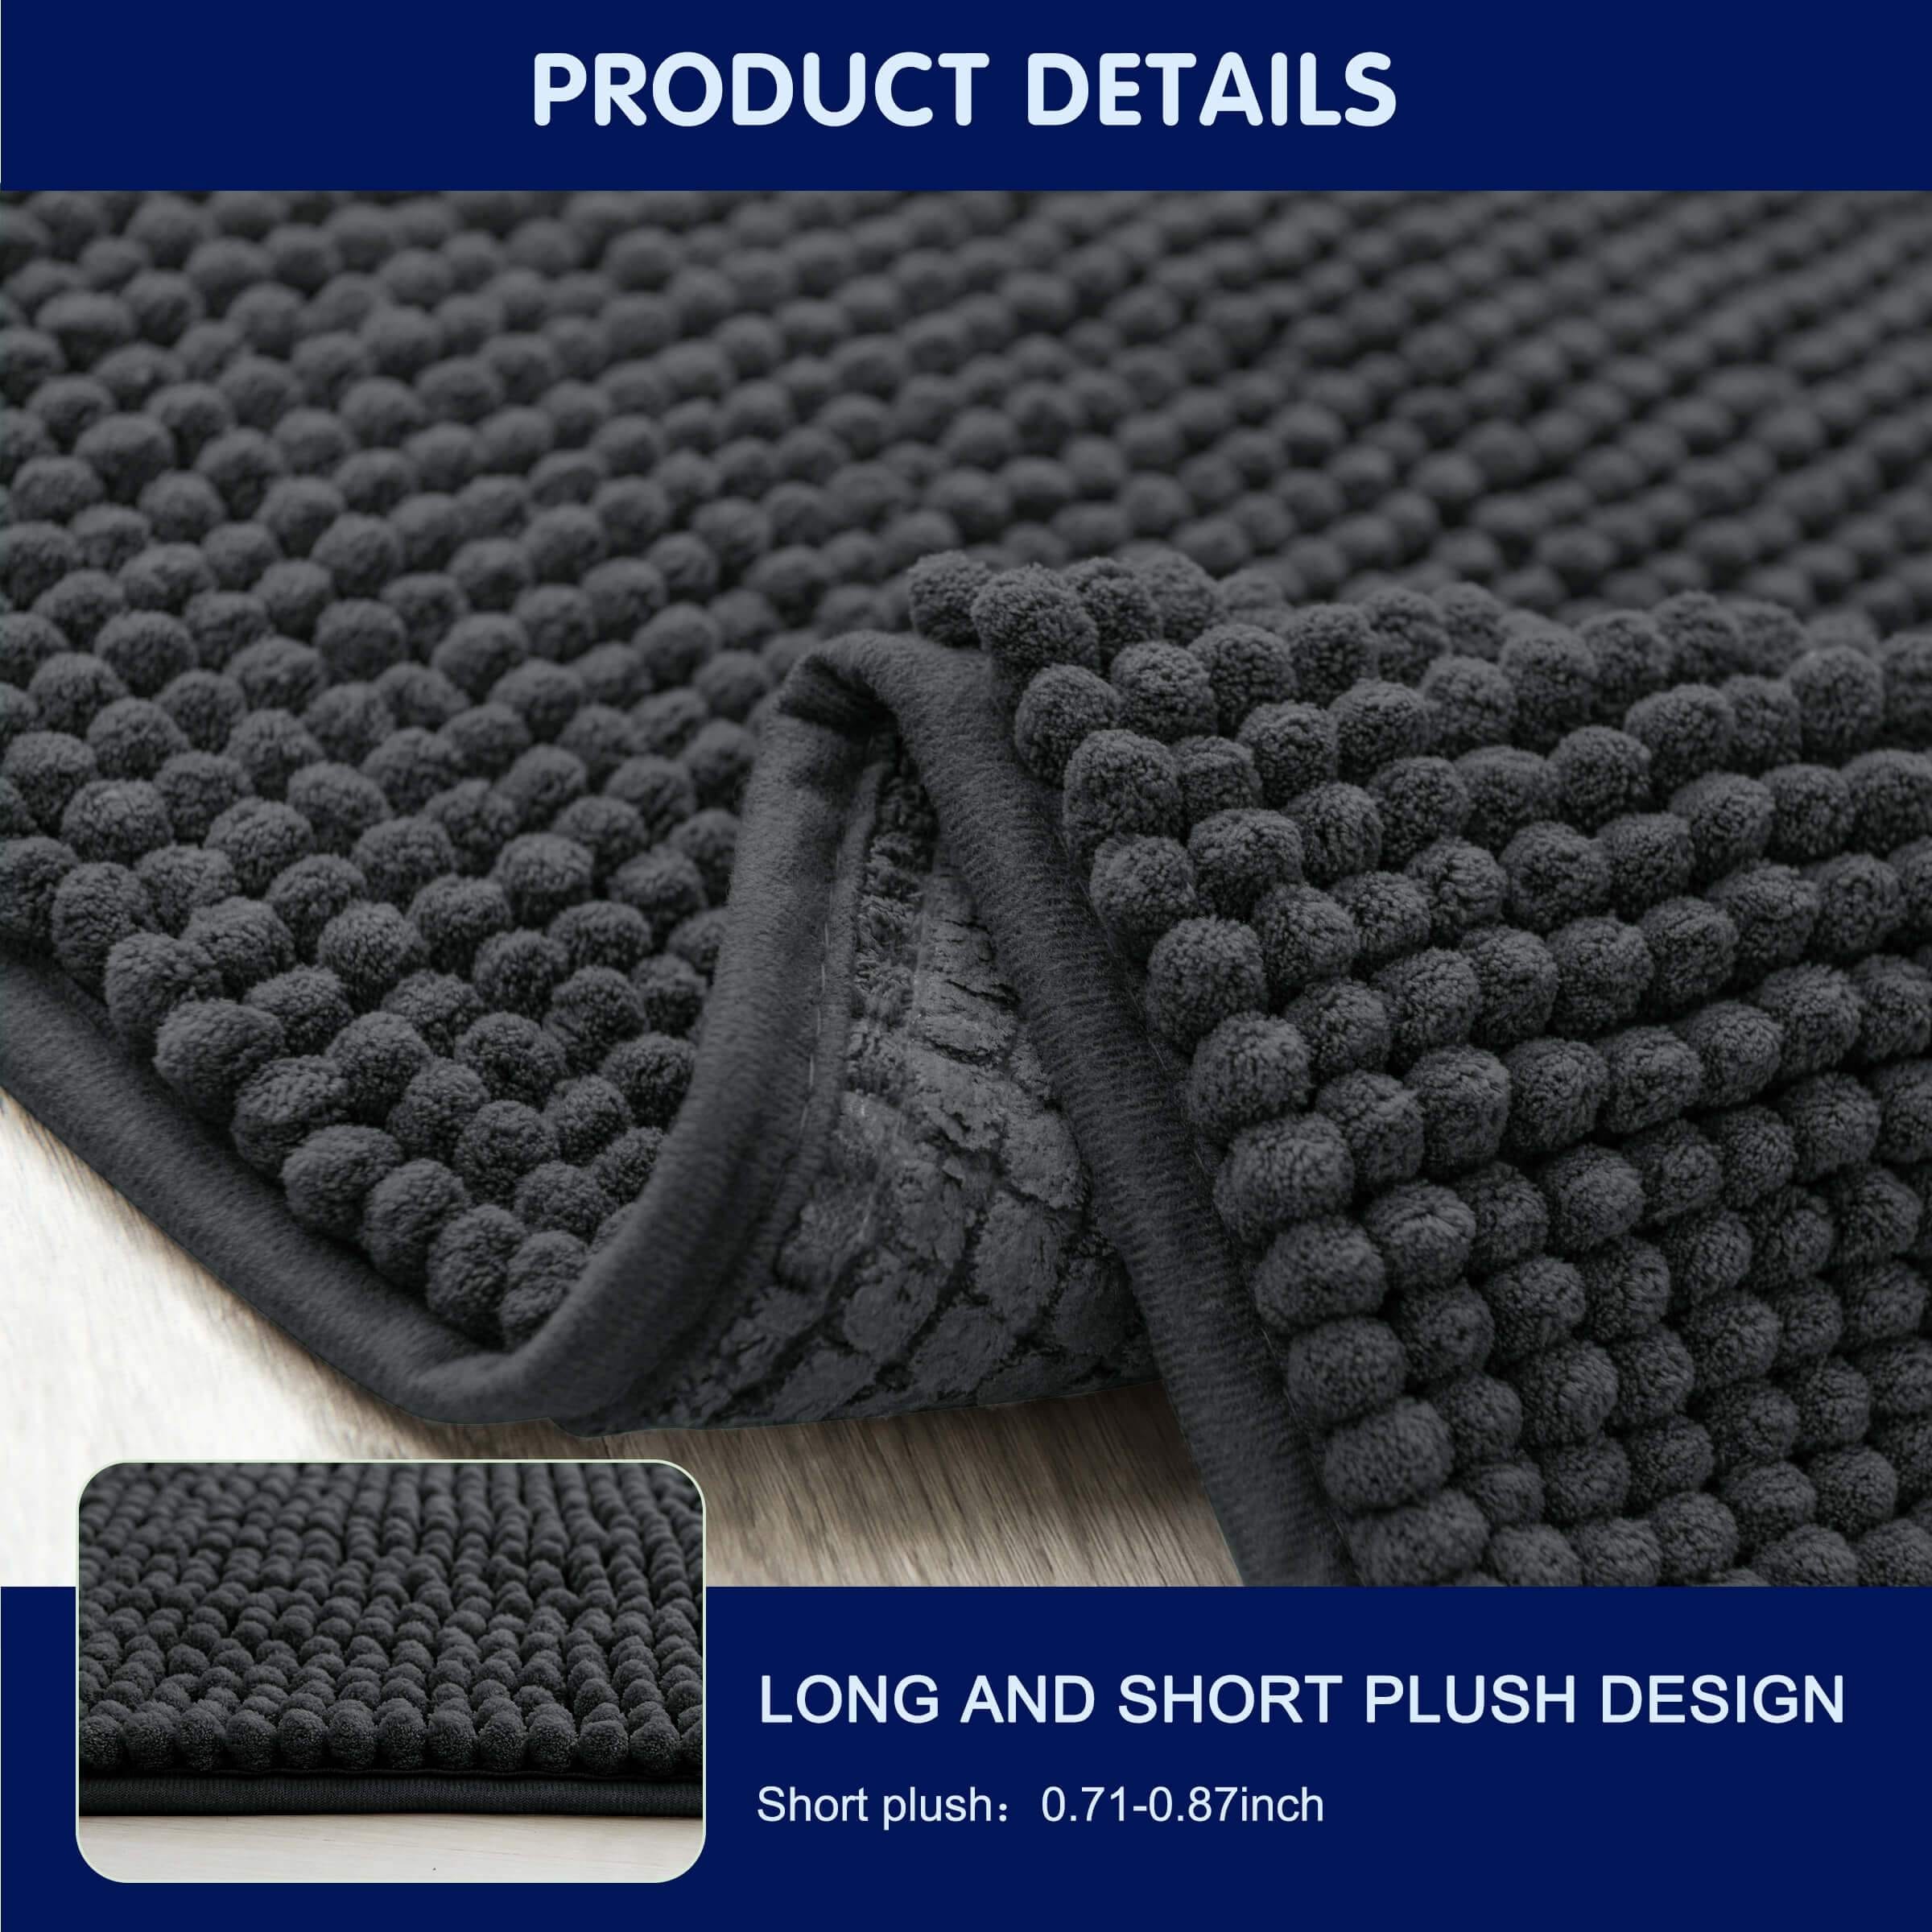 https://ak1.ostkcdn.com/images/products/is/images/direct/0bfd84b6ec49cf57e17ce54d635ffd9a83ec5c2a/Subrtex-Chenille-Bathroom-Rugs-Soft-Super-Water-Absorbing-Shower-Mats.jpg